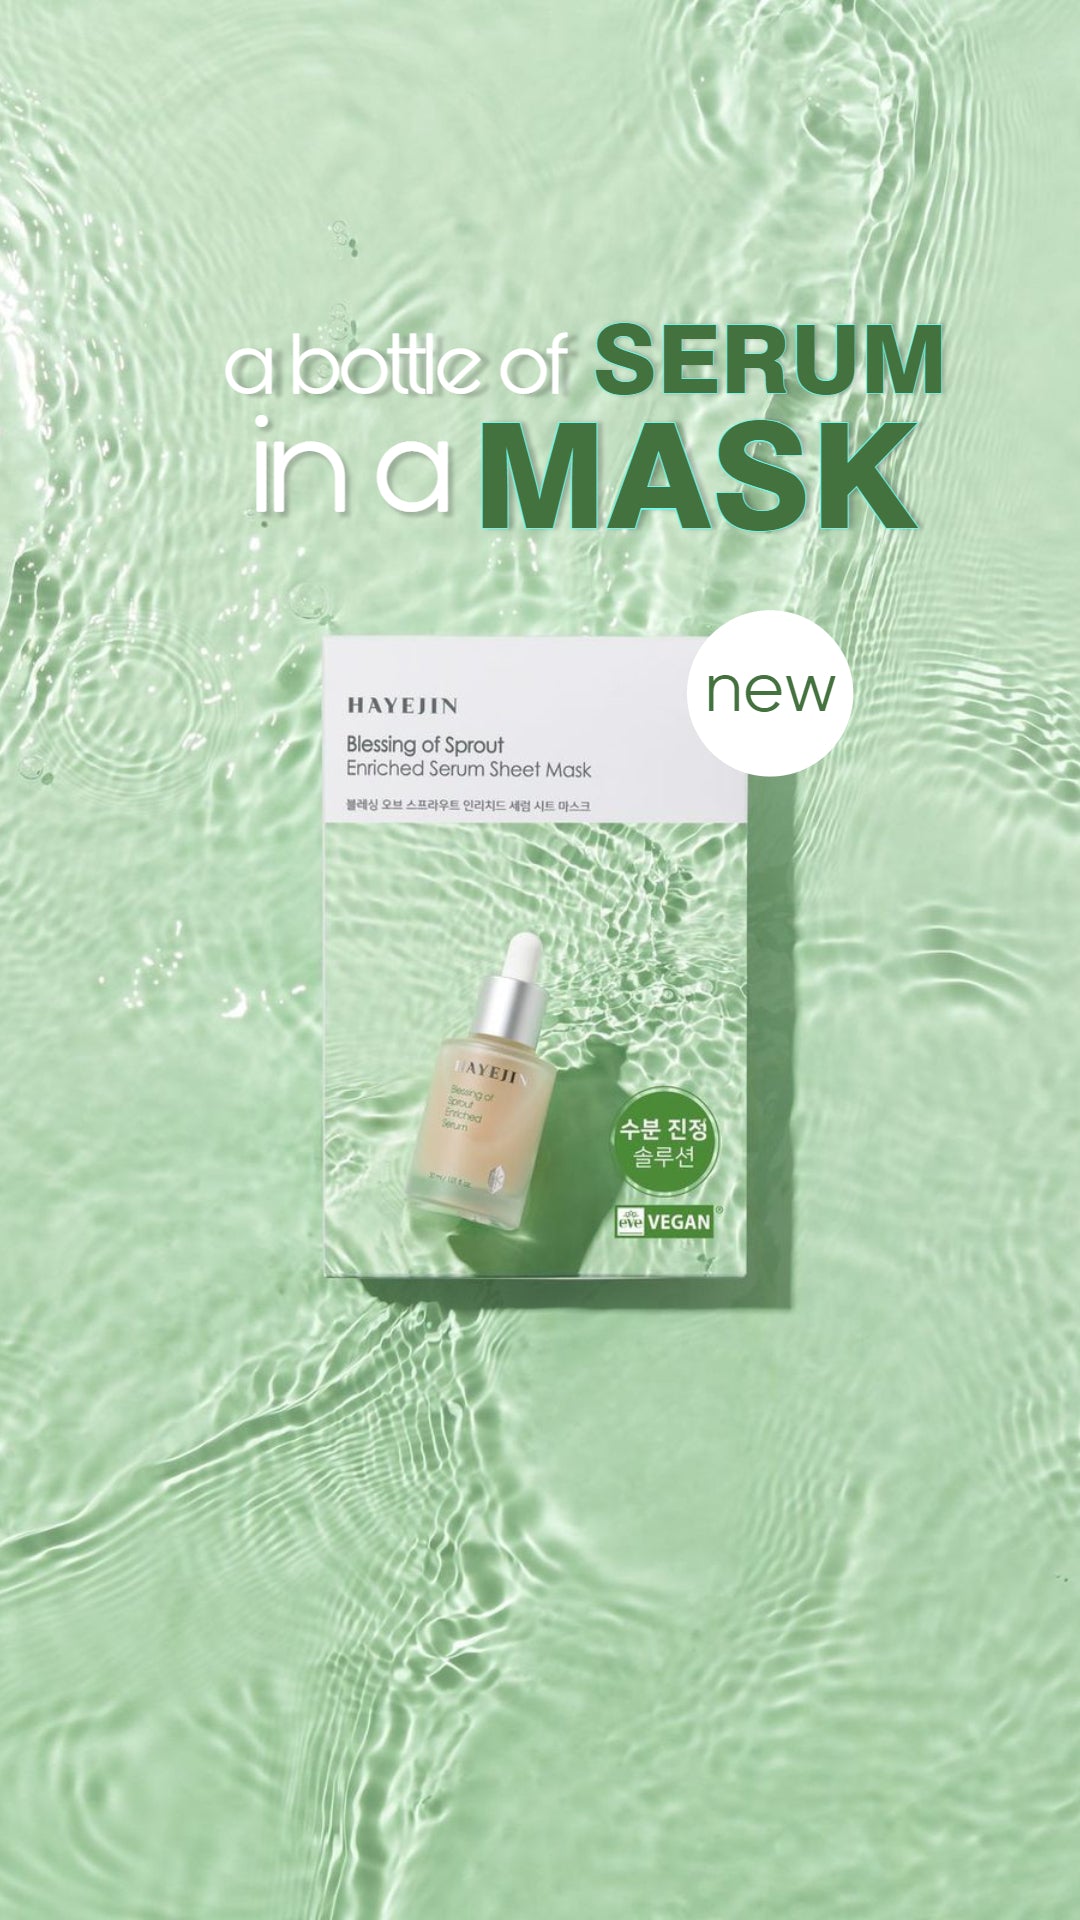 Hayejin Blessing of Sprout Enriched Serum Sheet Mask